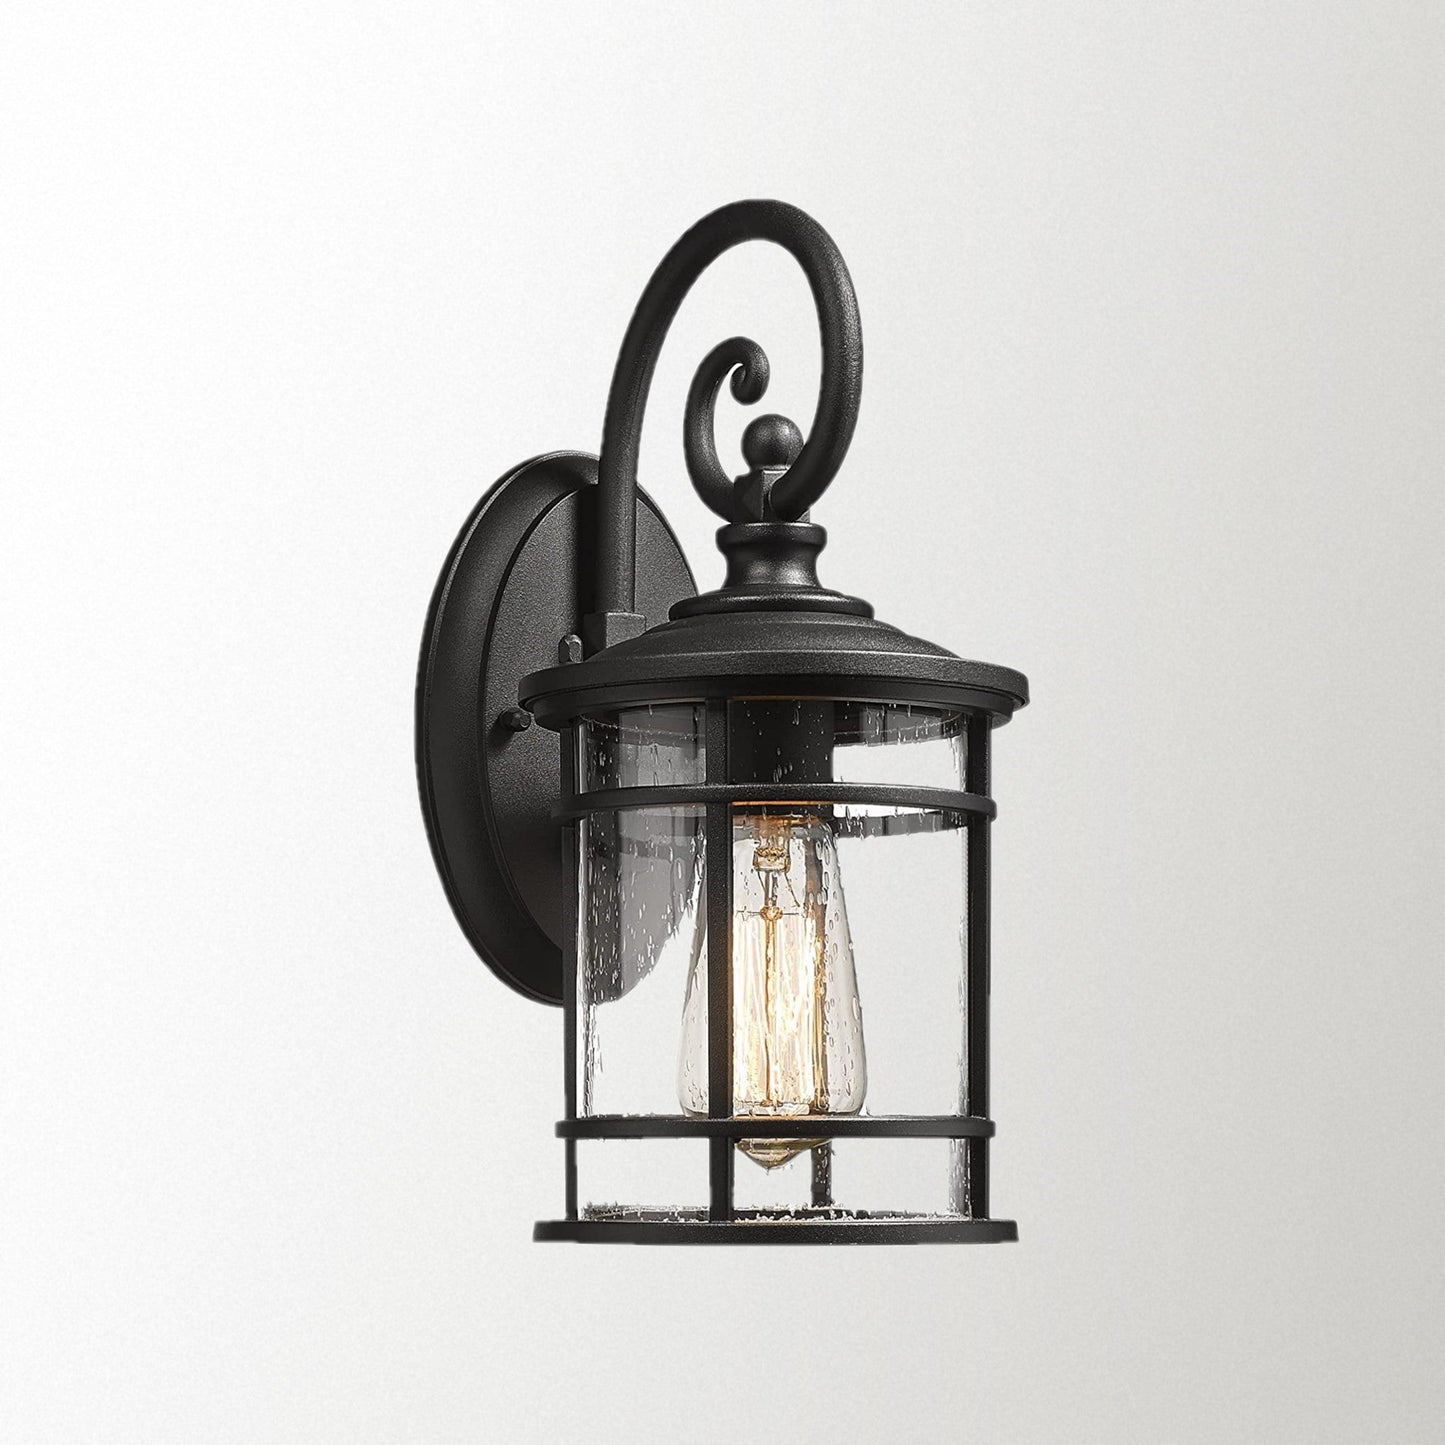 
                  
                    Emliviar Modern Outdoor Wall Lantern - Exterior Carriage Light for Garage Front Porch with Seeded Glass Shade, 15.5 Inch Height, Black Finish,XE229B BK
                  
                